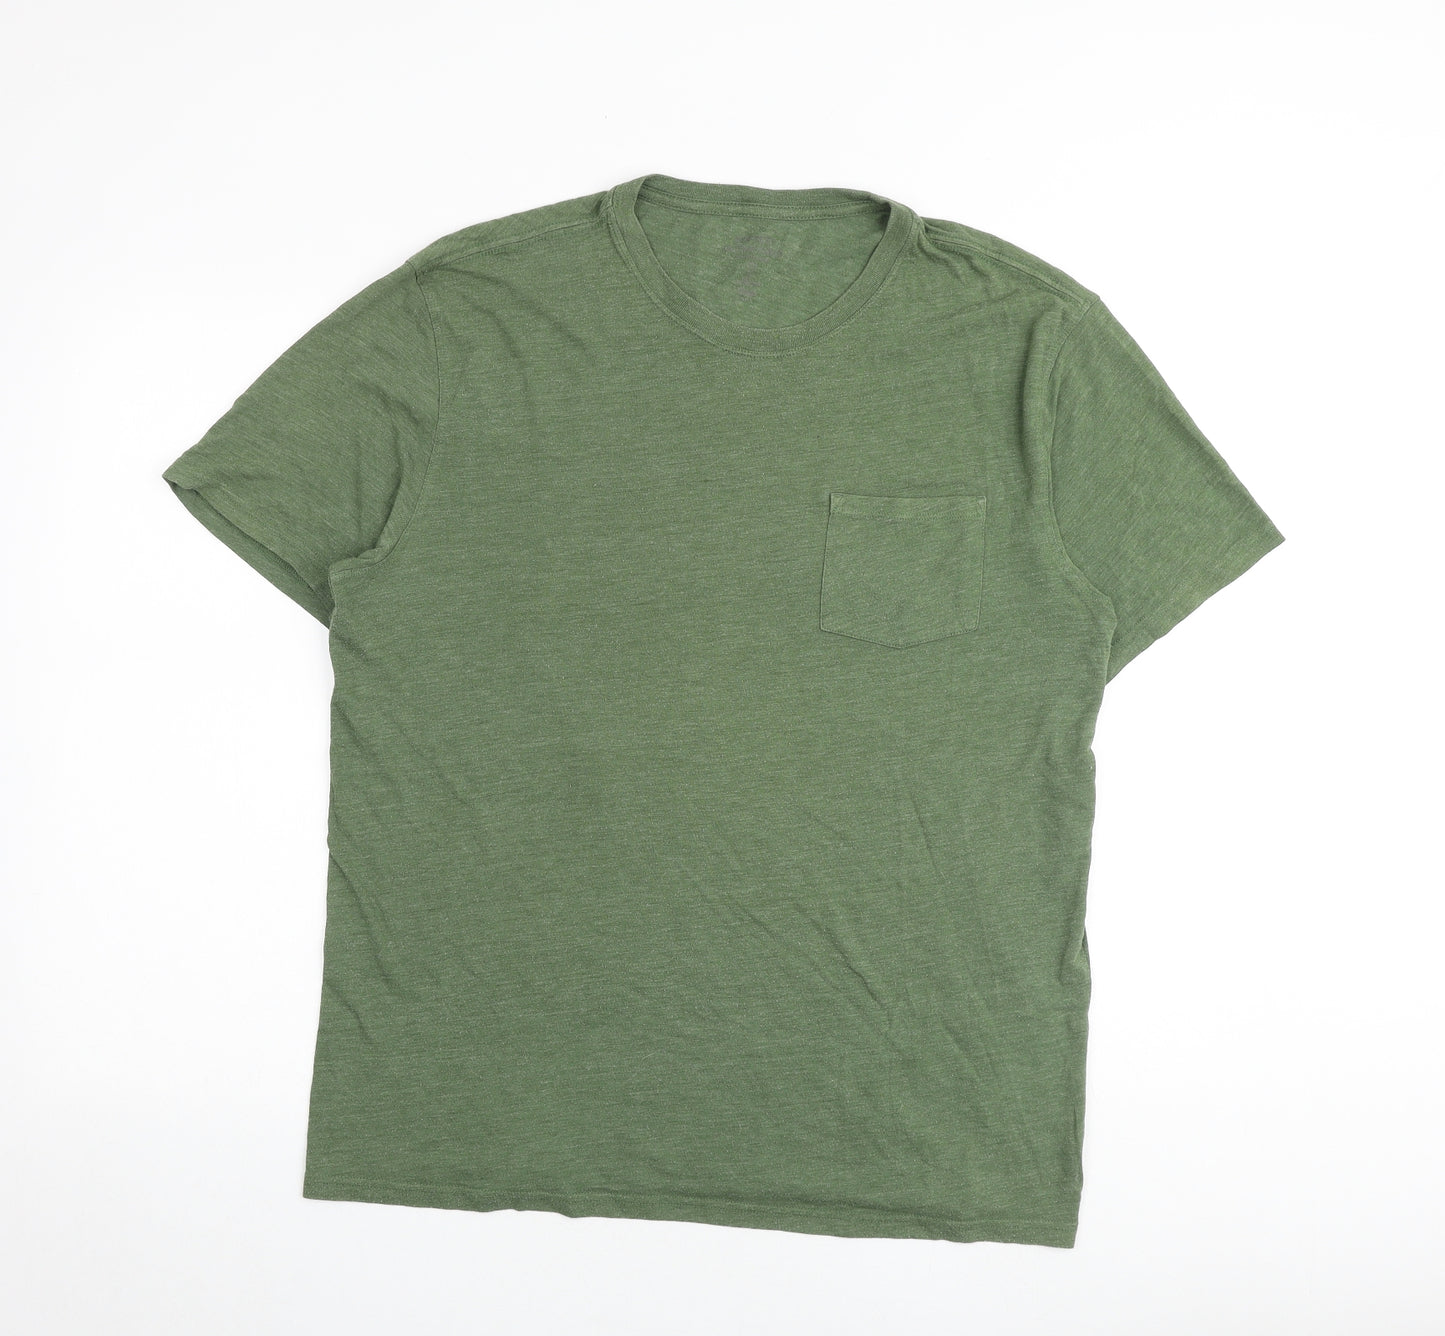 Gap Mens Green Polyester T-Shirt Size L Round Neck